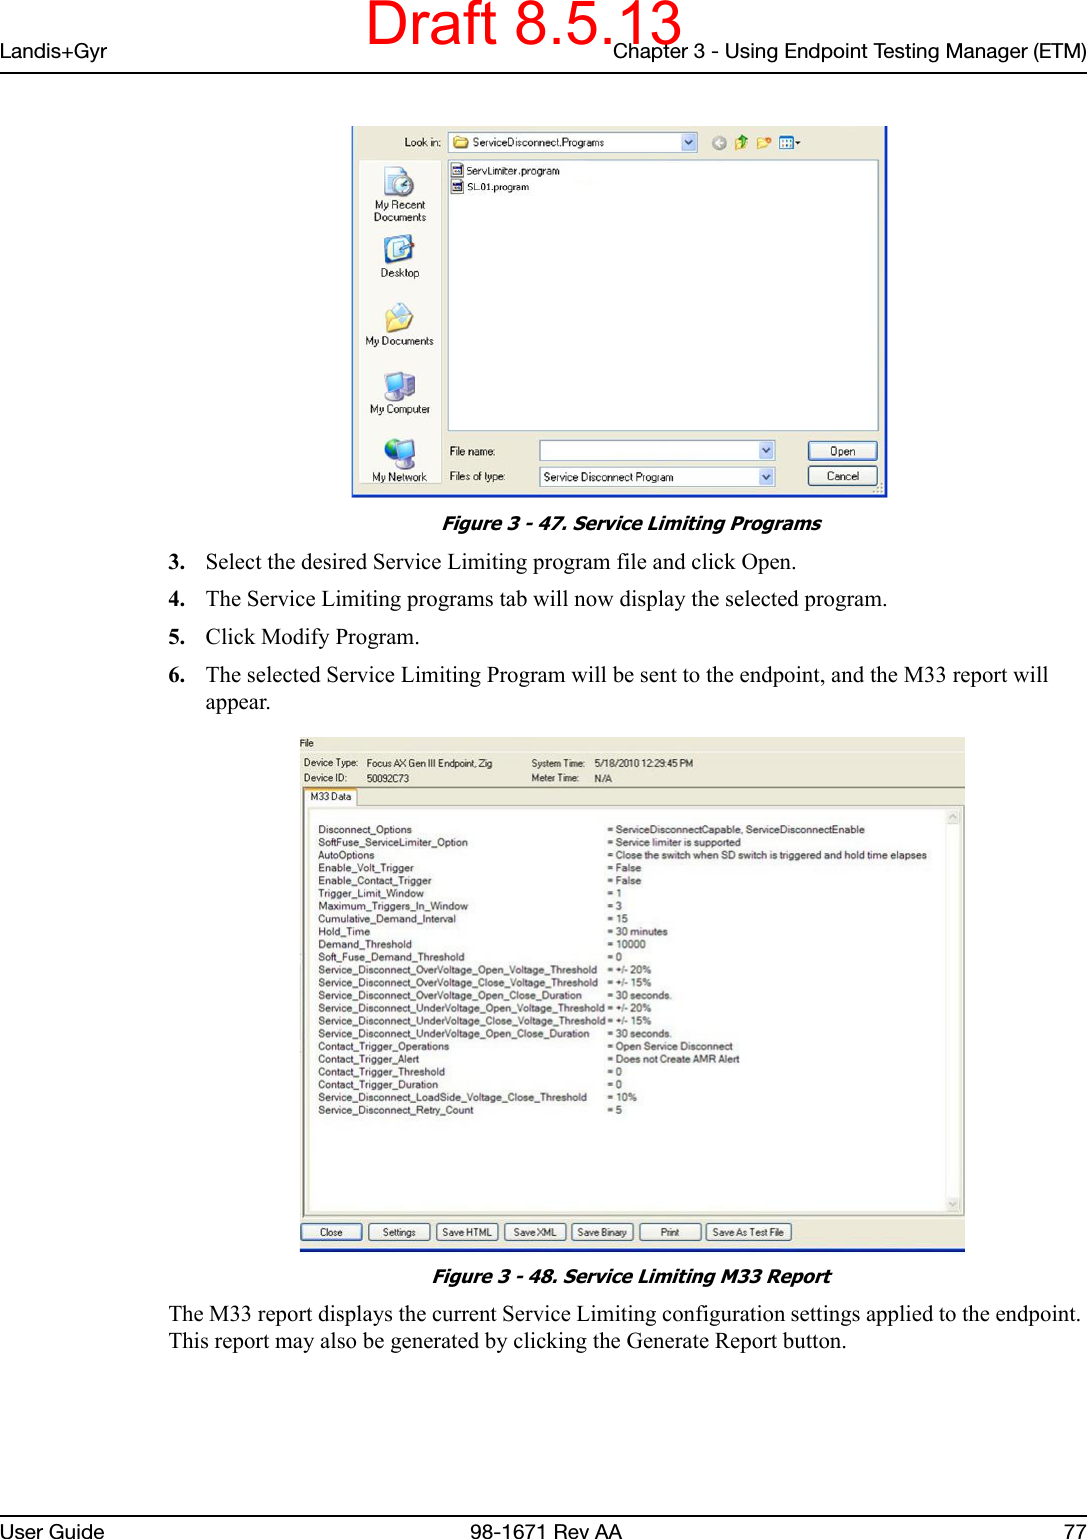 Landis+Gyr Chapter 3 - Using Endpoint Testing Manager (ETM)User Guide  98-1671 Rev AA 77 Figure 3 - 47. Service Limiting Programs3. Select the desired Service Limiting program file and click Open.4. The Service Limiting programs tab will now display the selected program.5. Click Modify Program. 6. The selected Service Limiting Program will be sent to the endpoint, and the M33 report will appear. Figure 3 - 48. Service Limiting M33 ReportThe M33 report displays the current Service Limiting configuration settings applied to the endpoint. This report may also be generated by clicking the Generate Report button.Draft 8.5.13